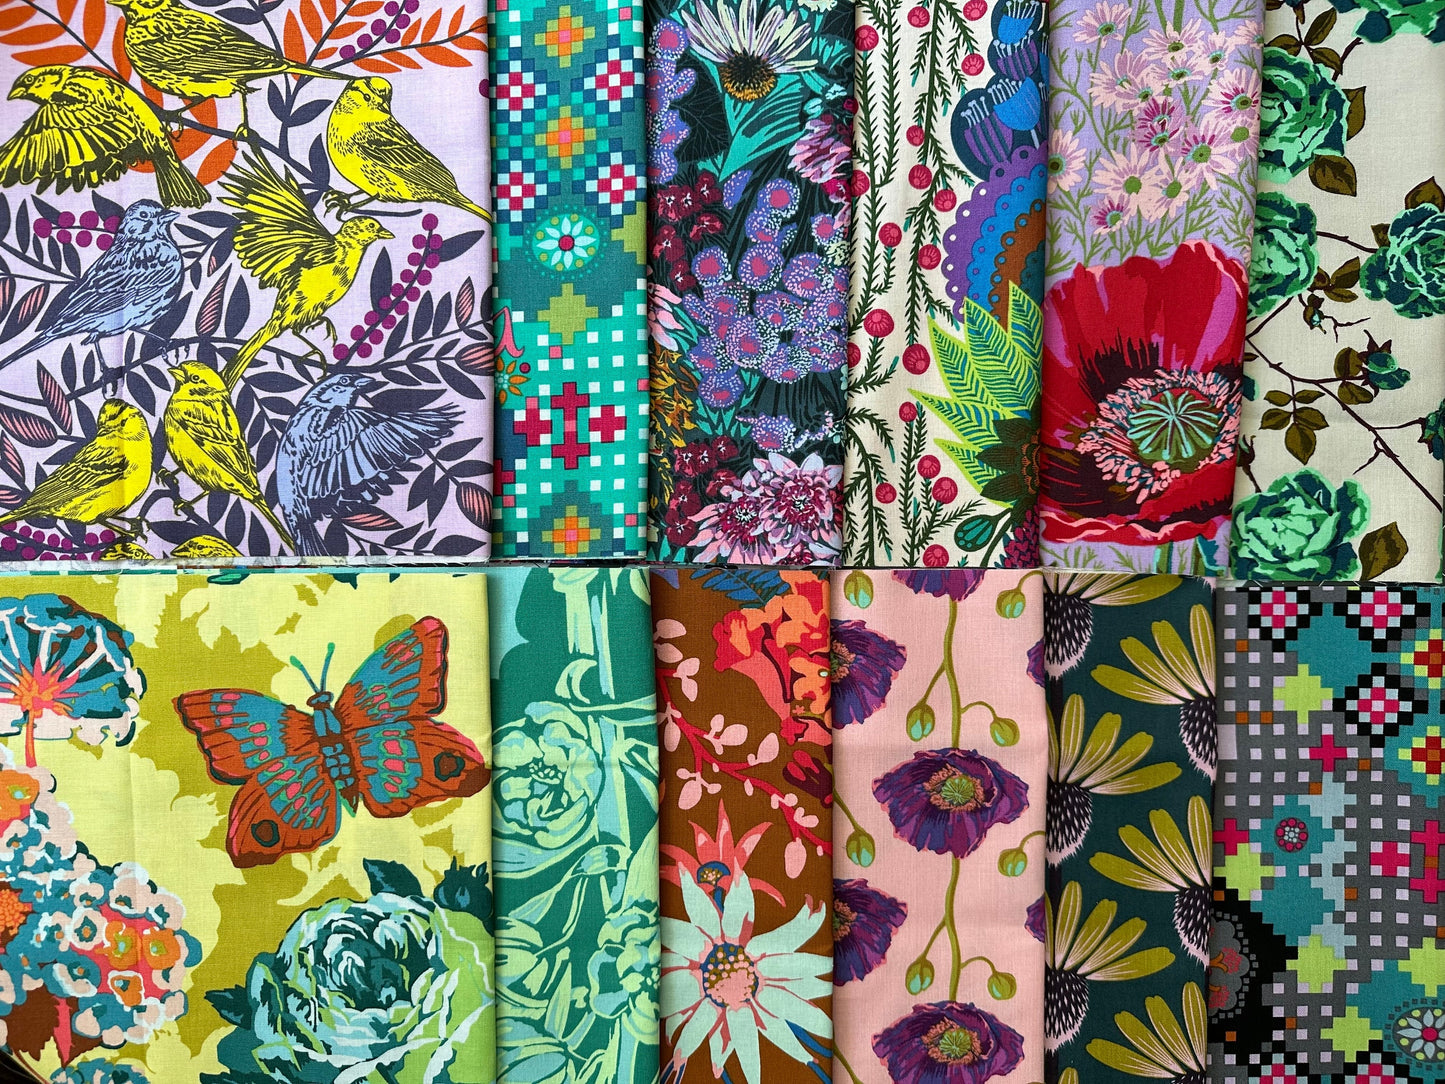 For The Love of Anna Maria - 12 Piece Bundle, Anna Maria Horner, Free Spirit, Mixed Bundle, Quilt Fabric, Cotton Fabric, Floral Fabric